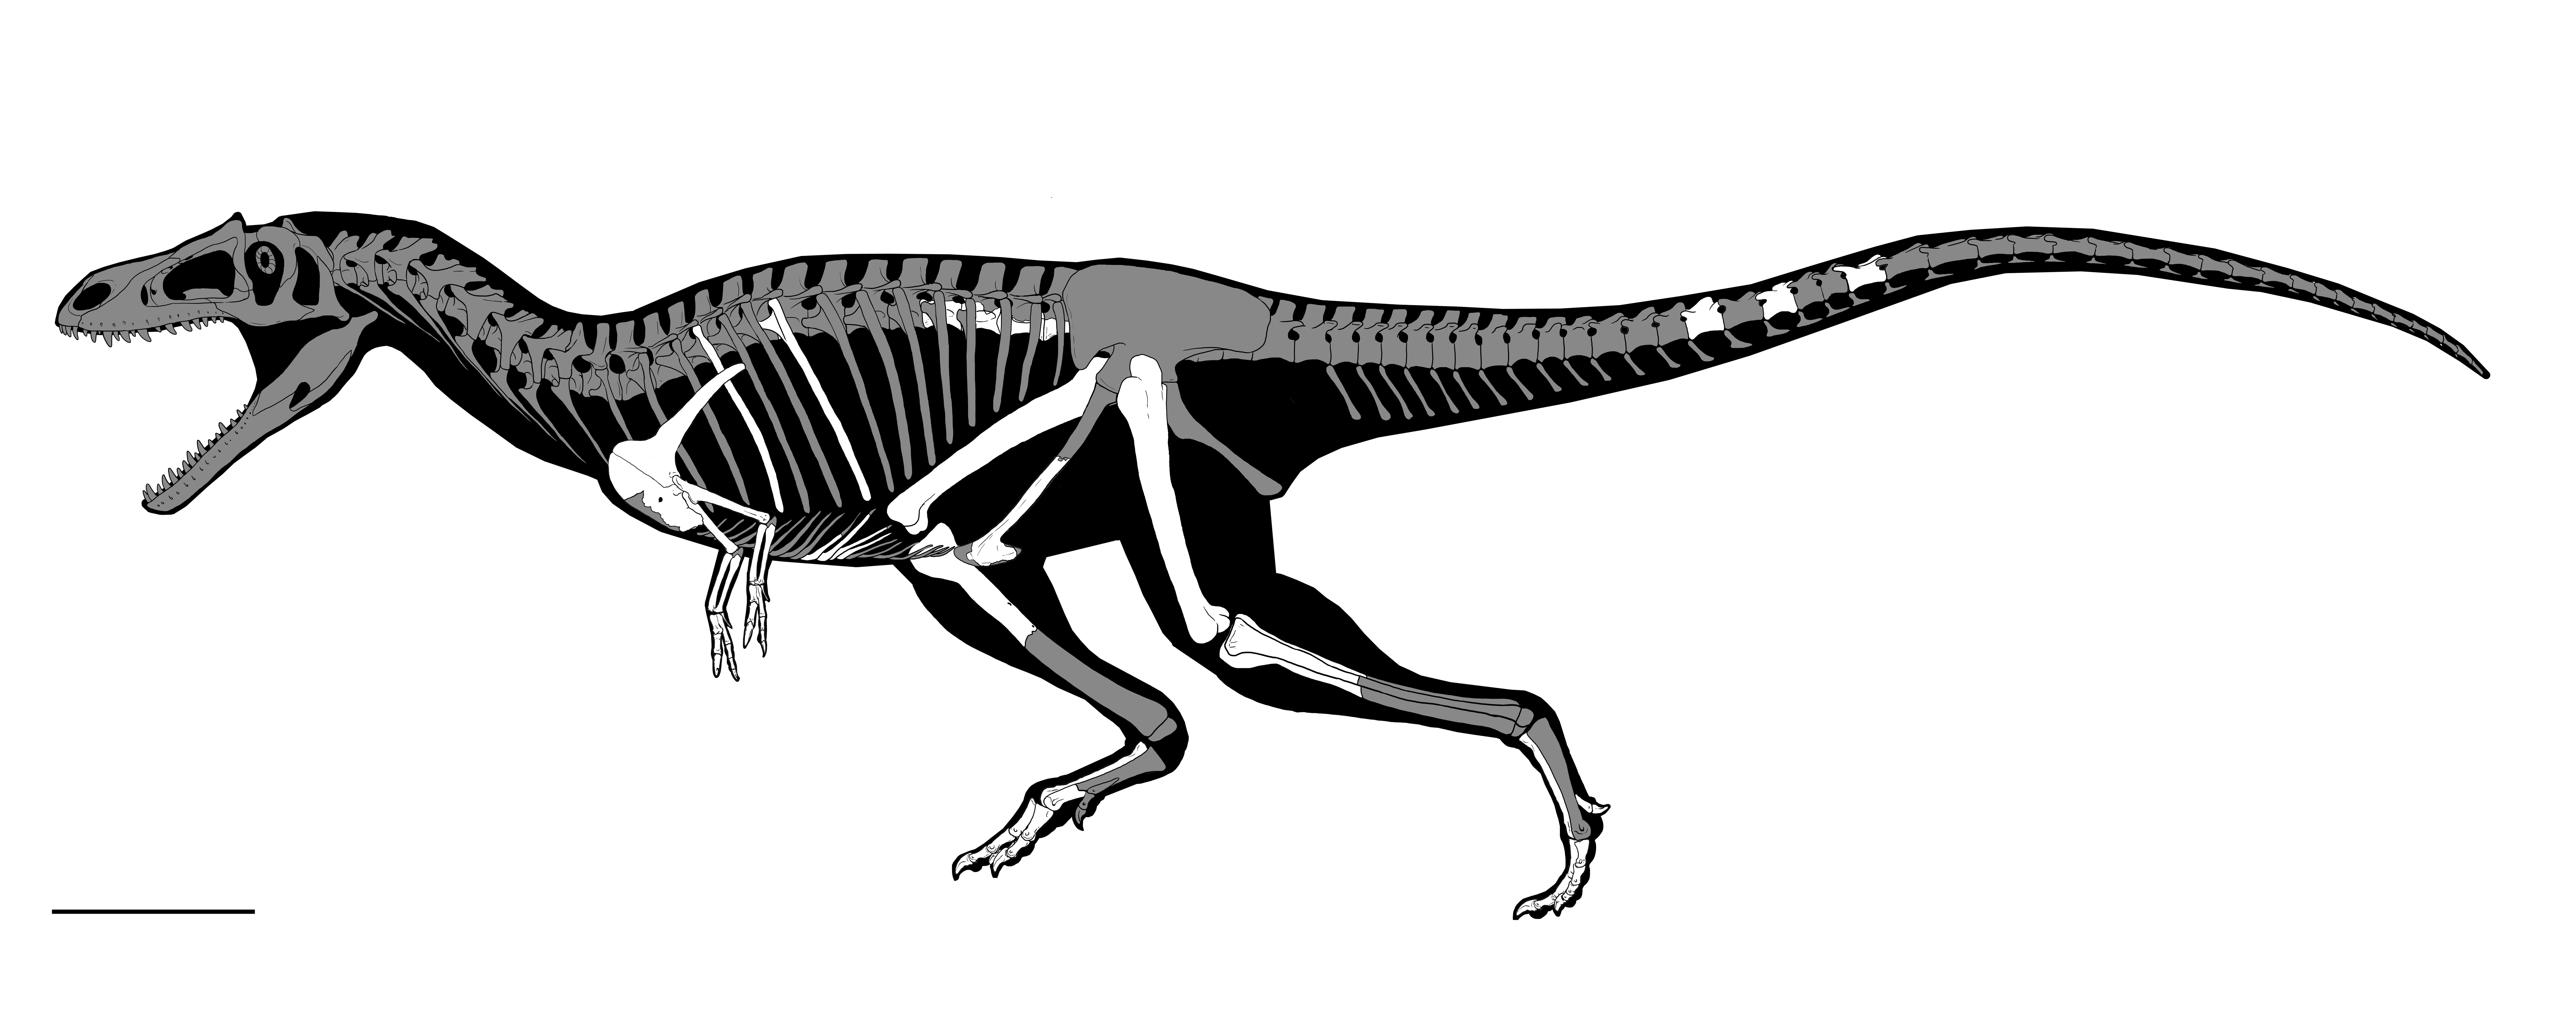 T. Rex Wasn’t The Only Dinosaur With Absurdly Tiny Arms